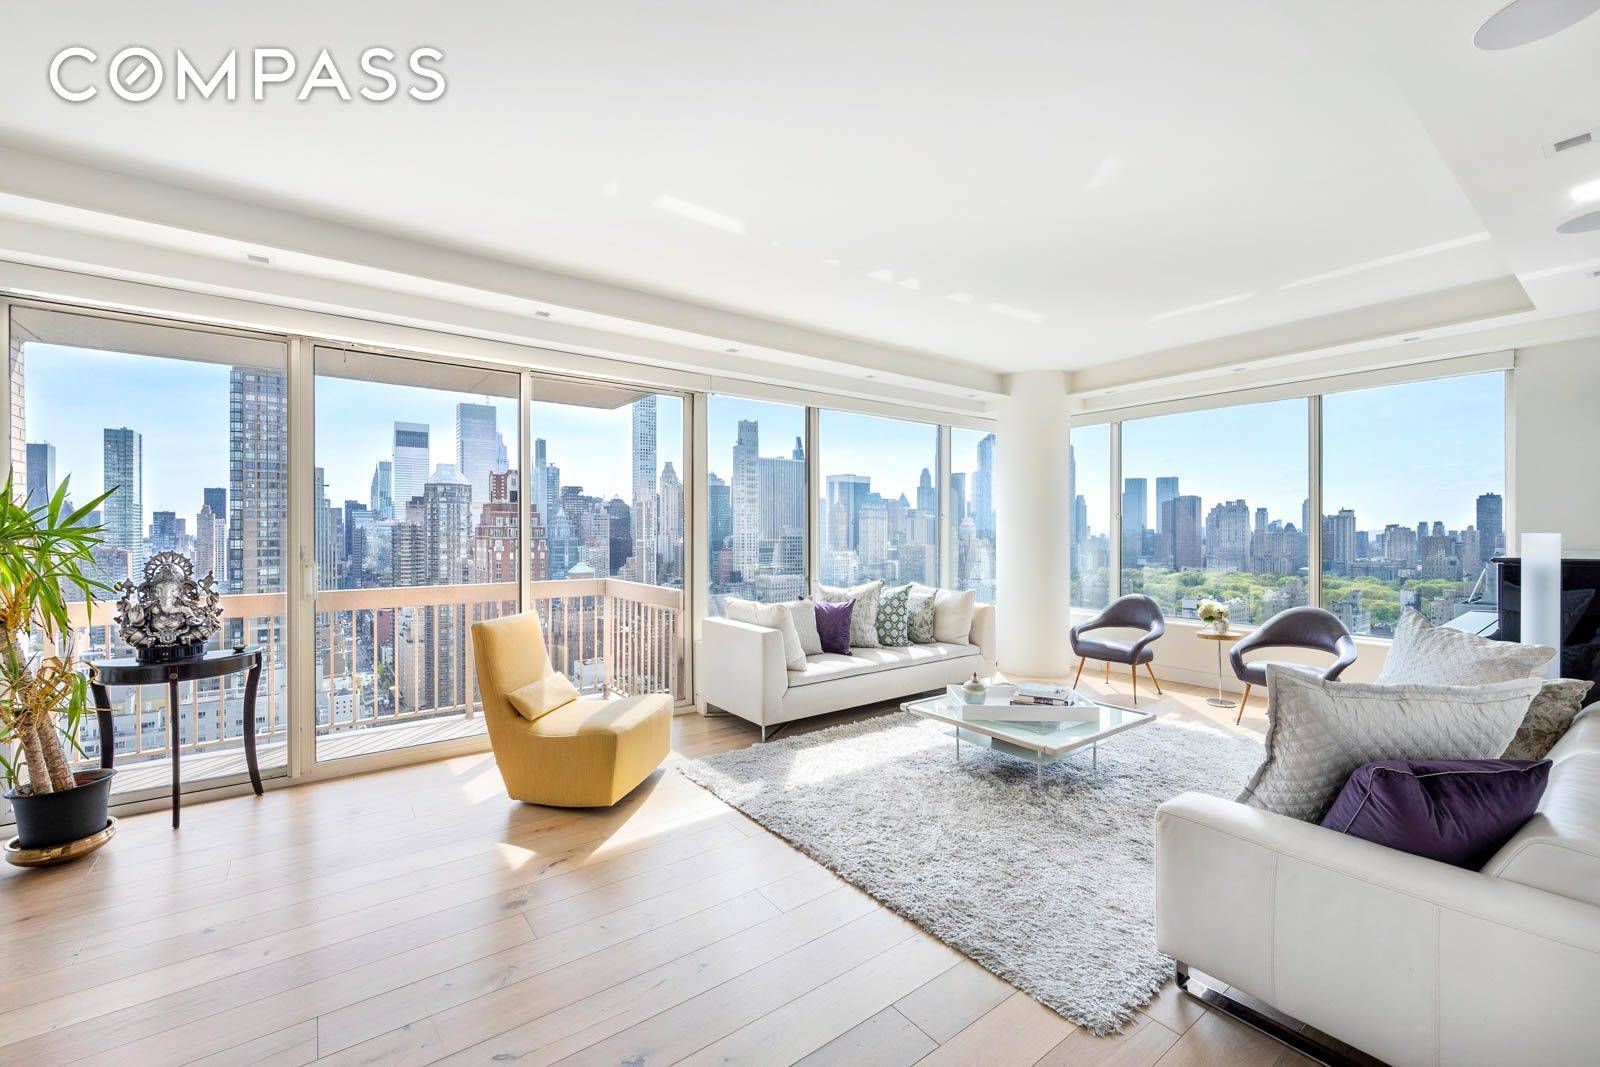 WRAPPED IN GLASS FLATTERED WITH BREATHTAKING VIEWS FROM THE 35TH FLOOR This architecturally renovated and reconfigured 3 bedroom 3.